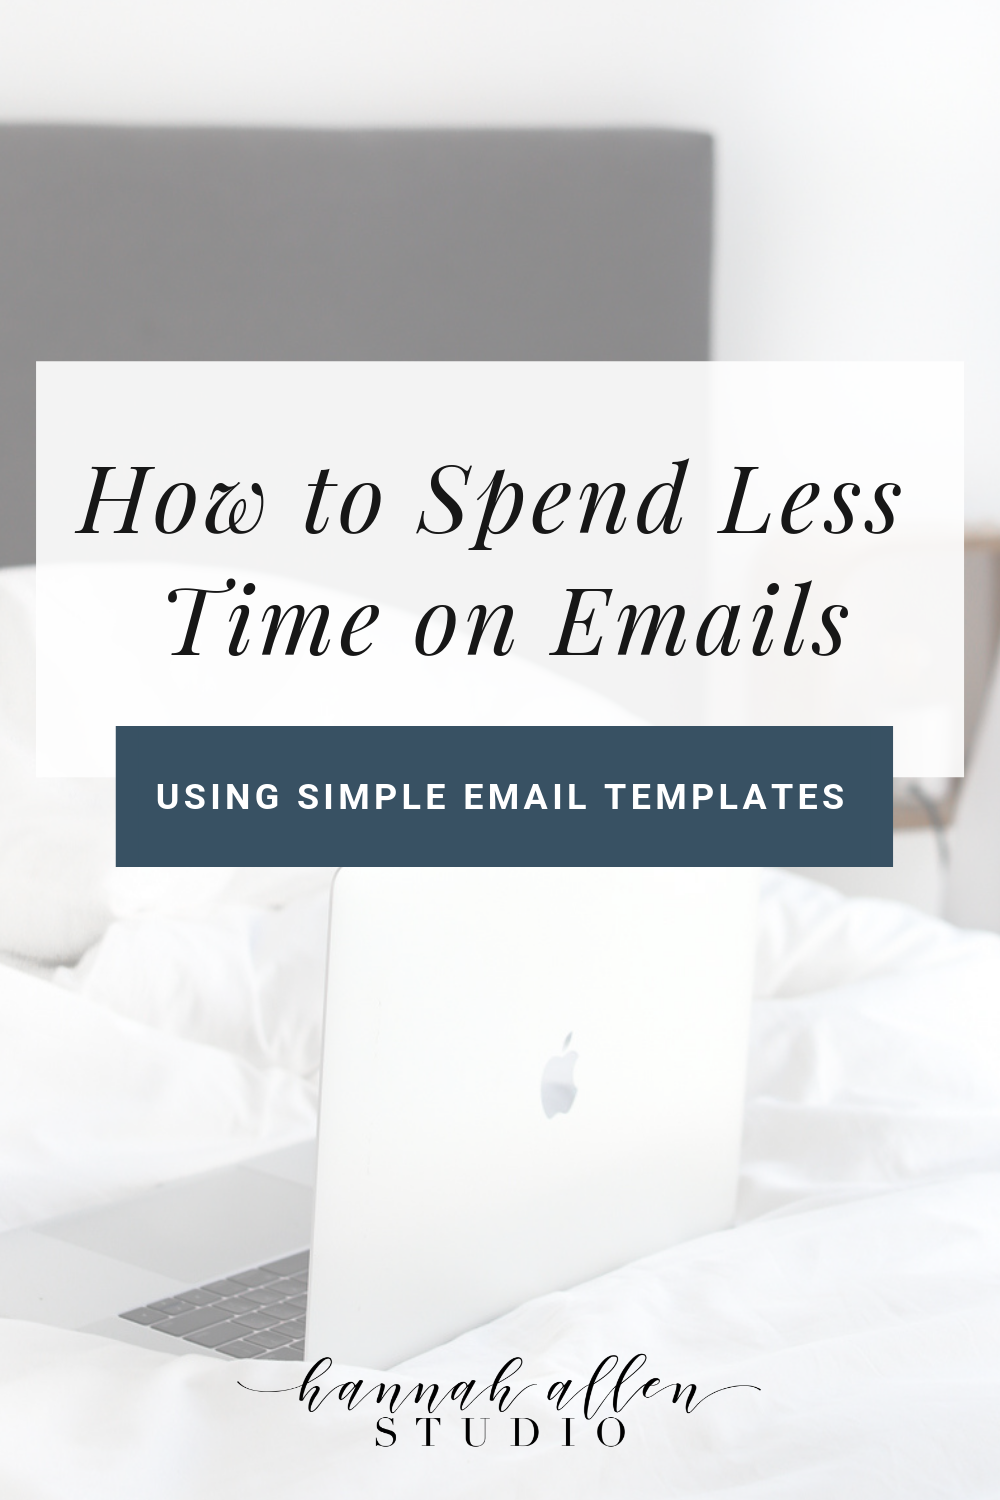 How to spend less time on emails - Hannah Allen